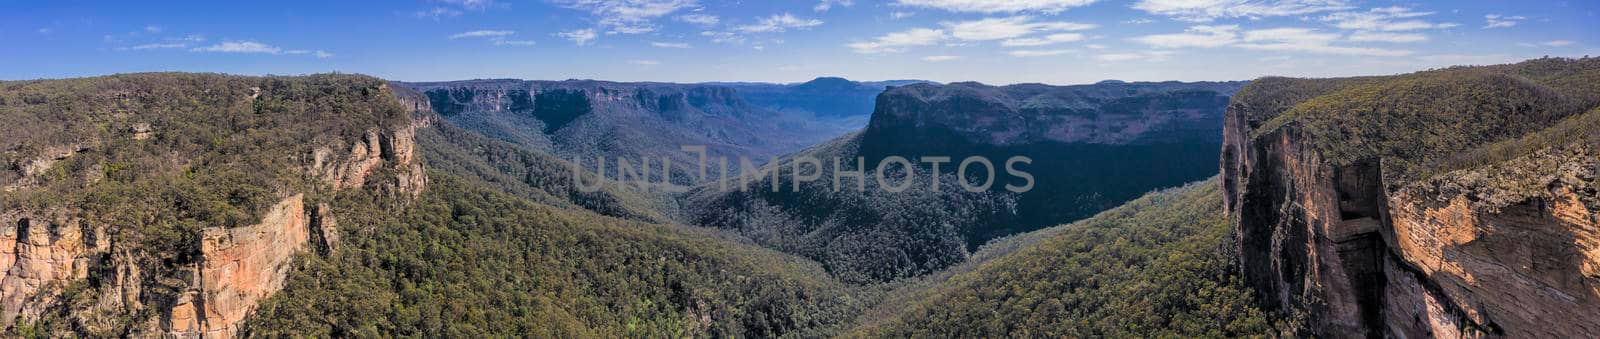 Aerial view of The Grand Canyon in regional New South Wales in Australia by WittkePhotos